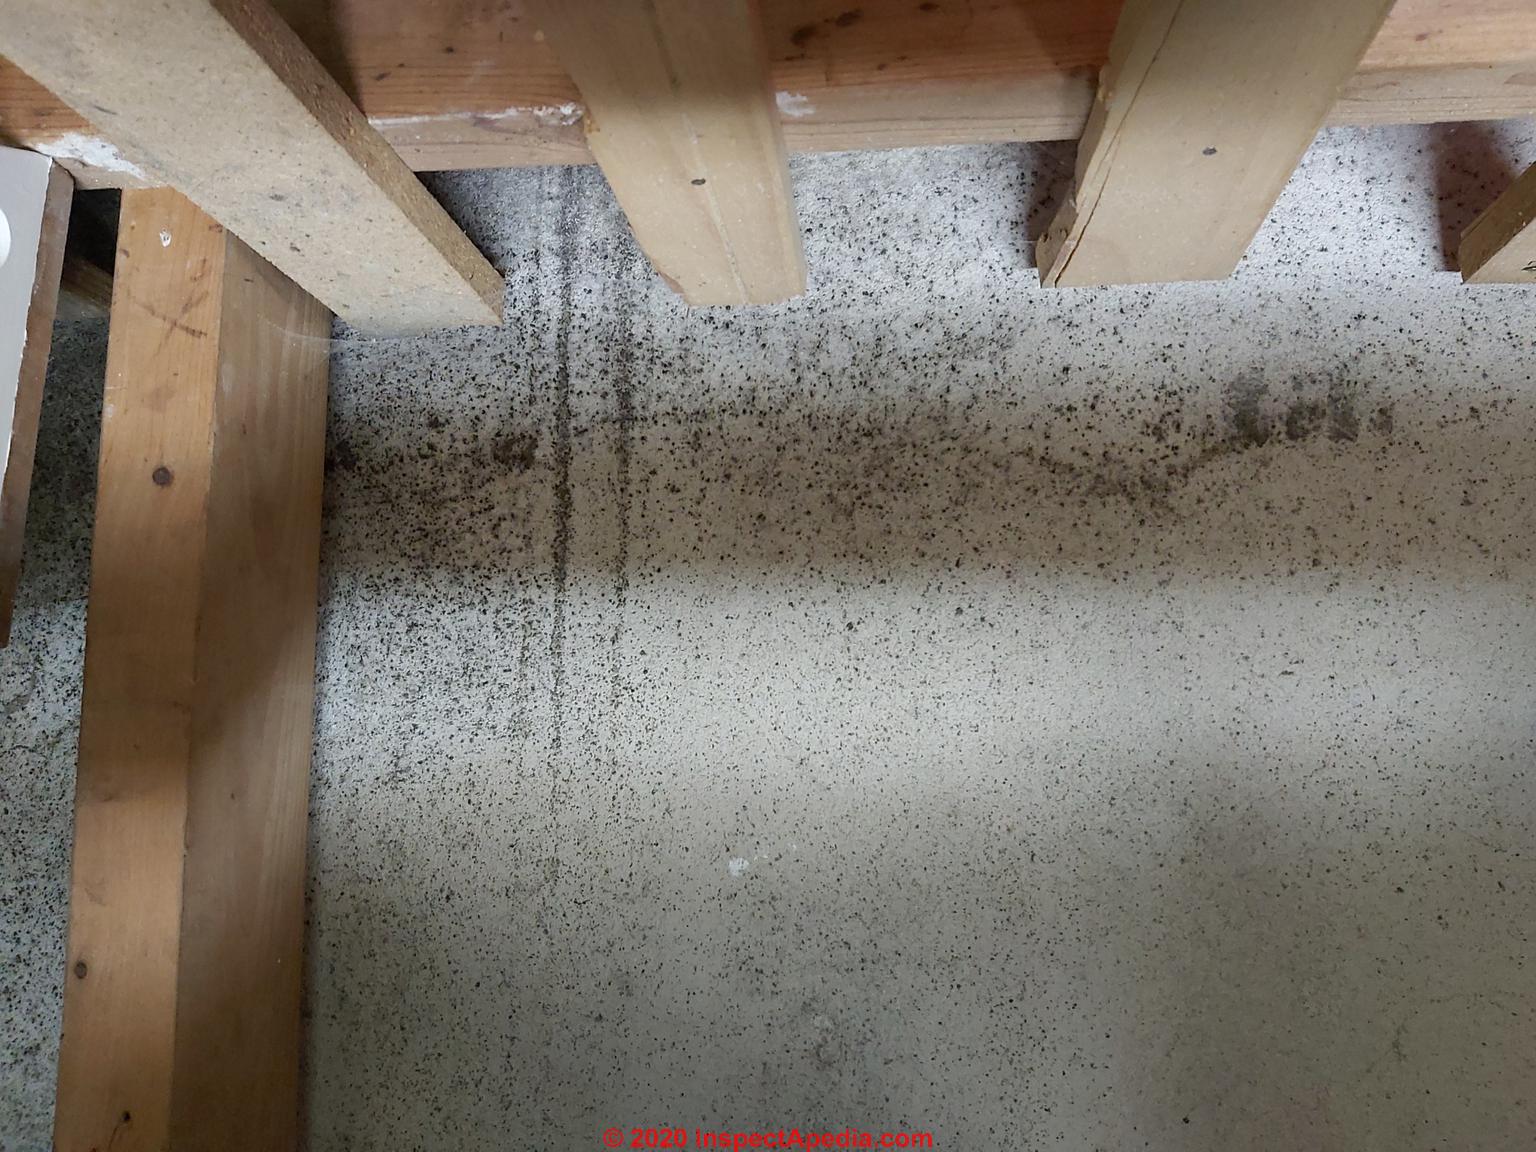 Photographic guide to Mold on computers, moldy concrete, mold on